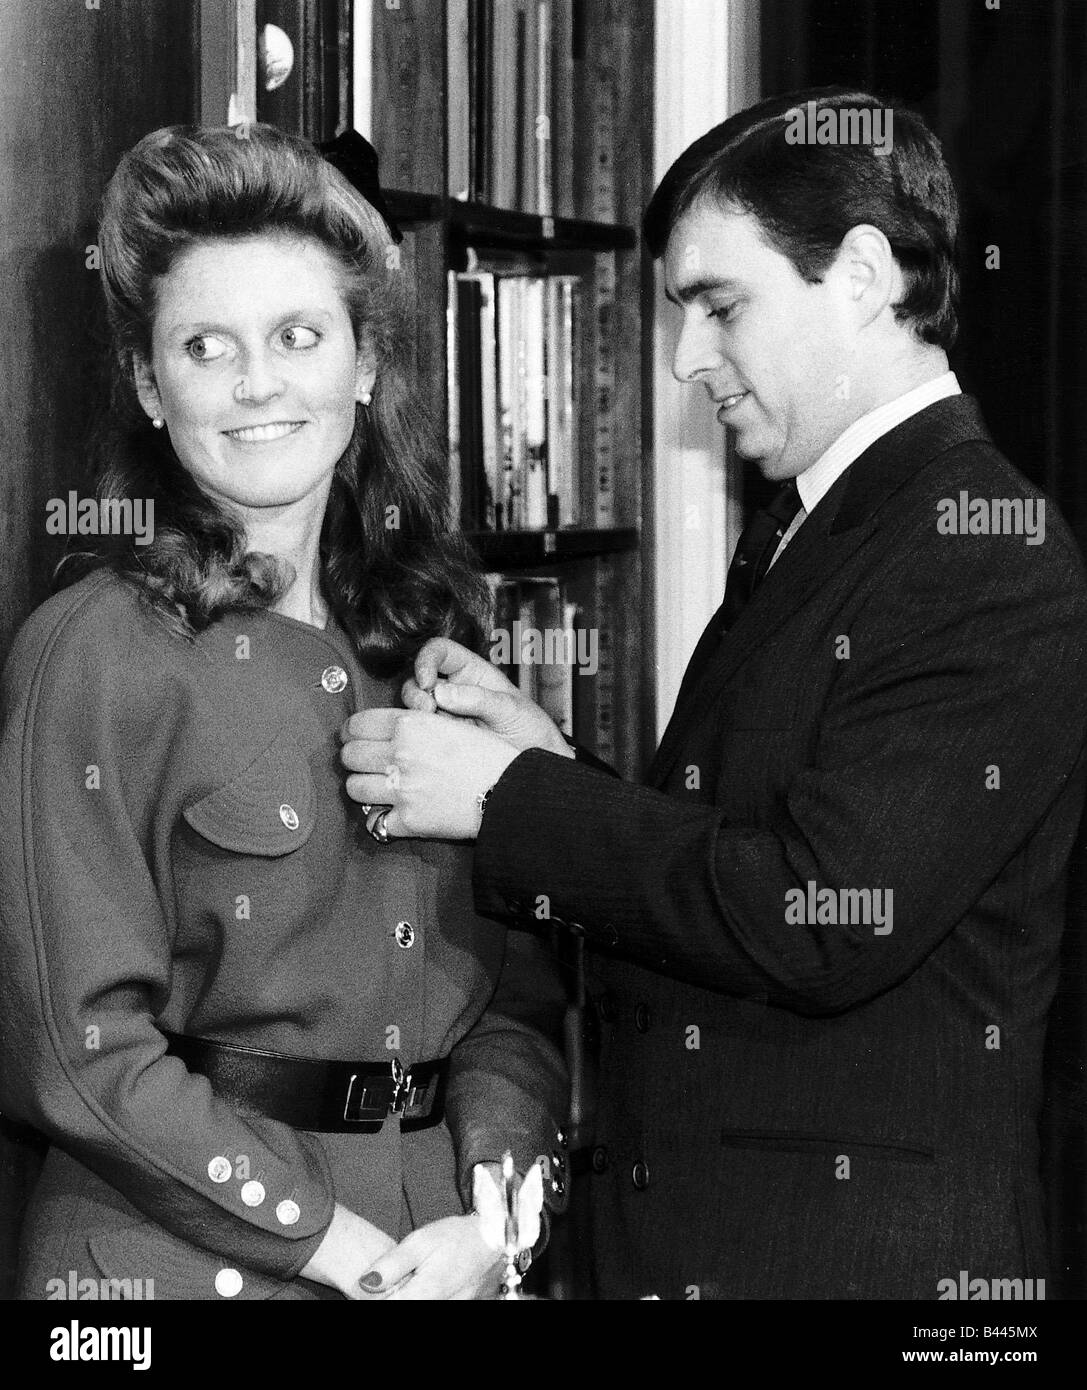 Prince Andrew With The Duchess Of Yor as He Gives Her Pilots Licence Badge November 1996 Stock Photo